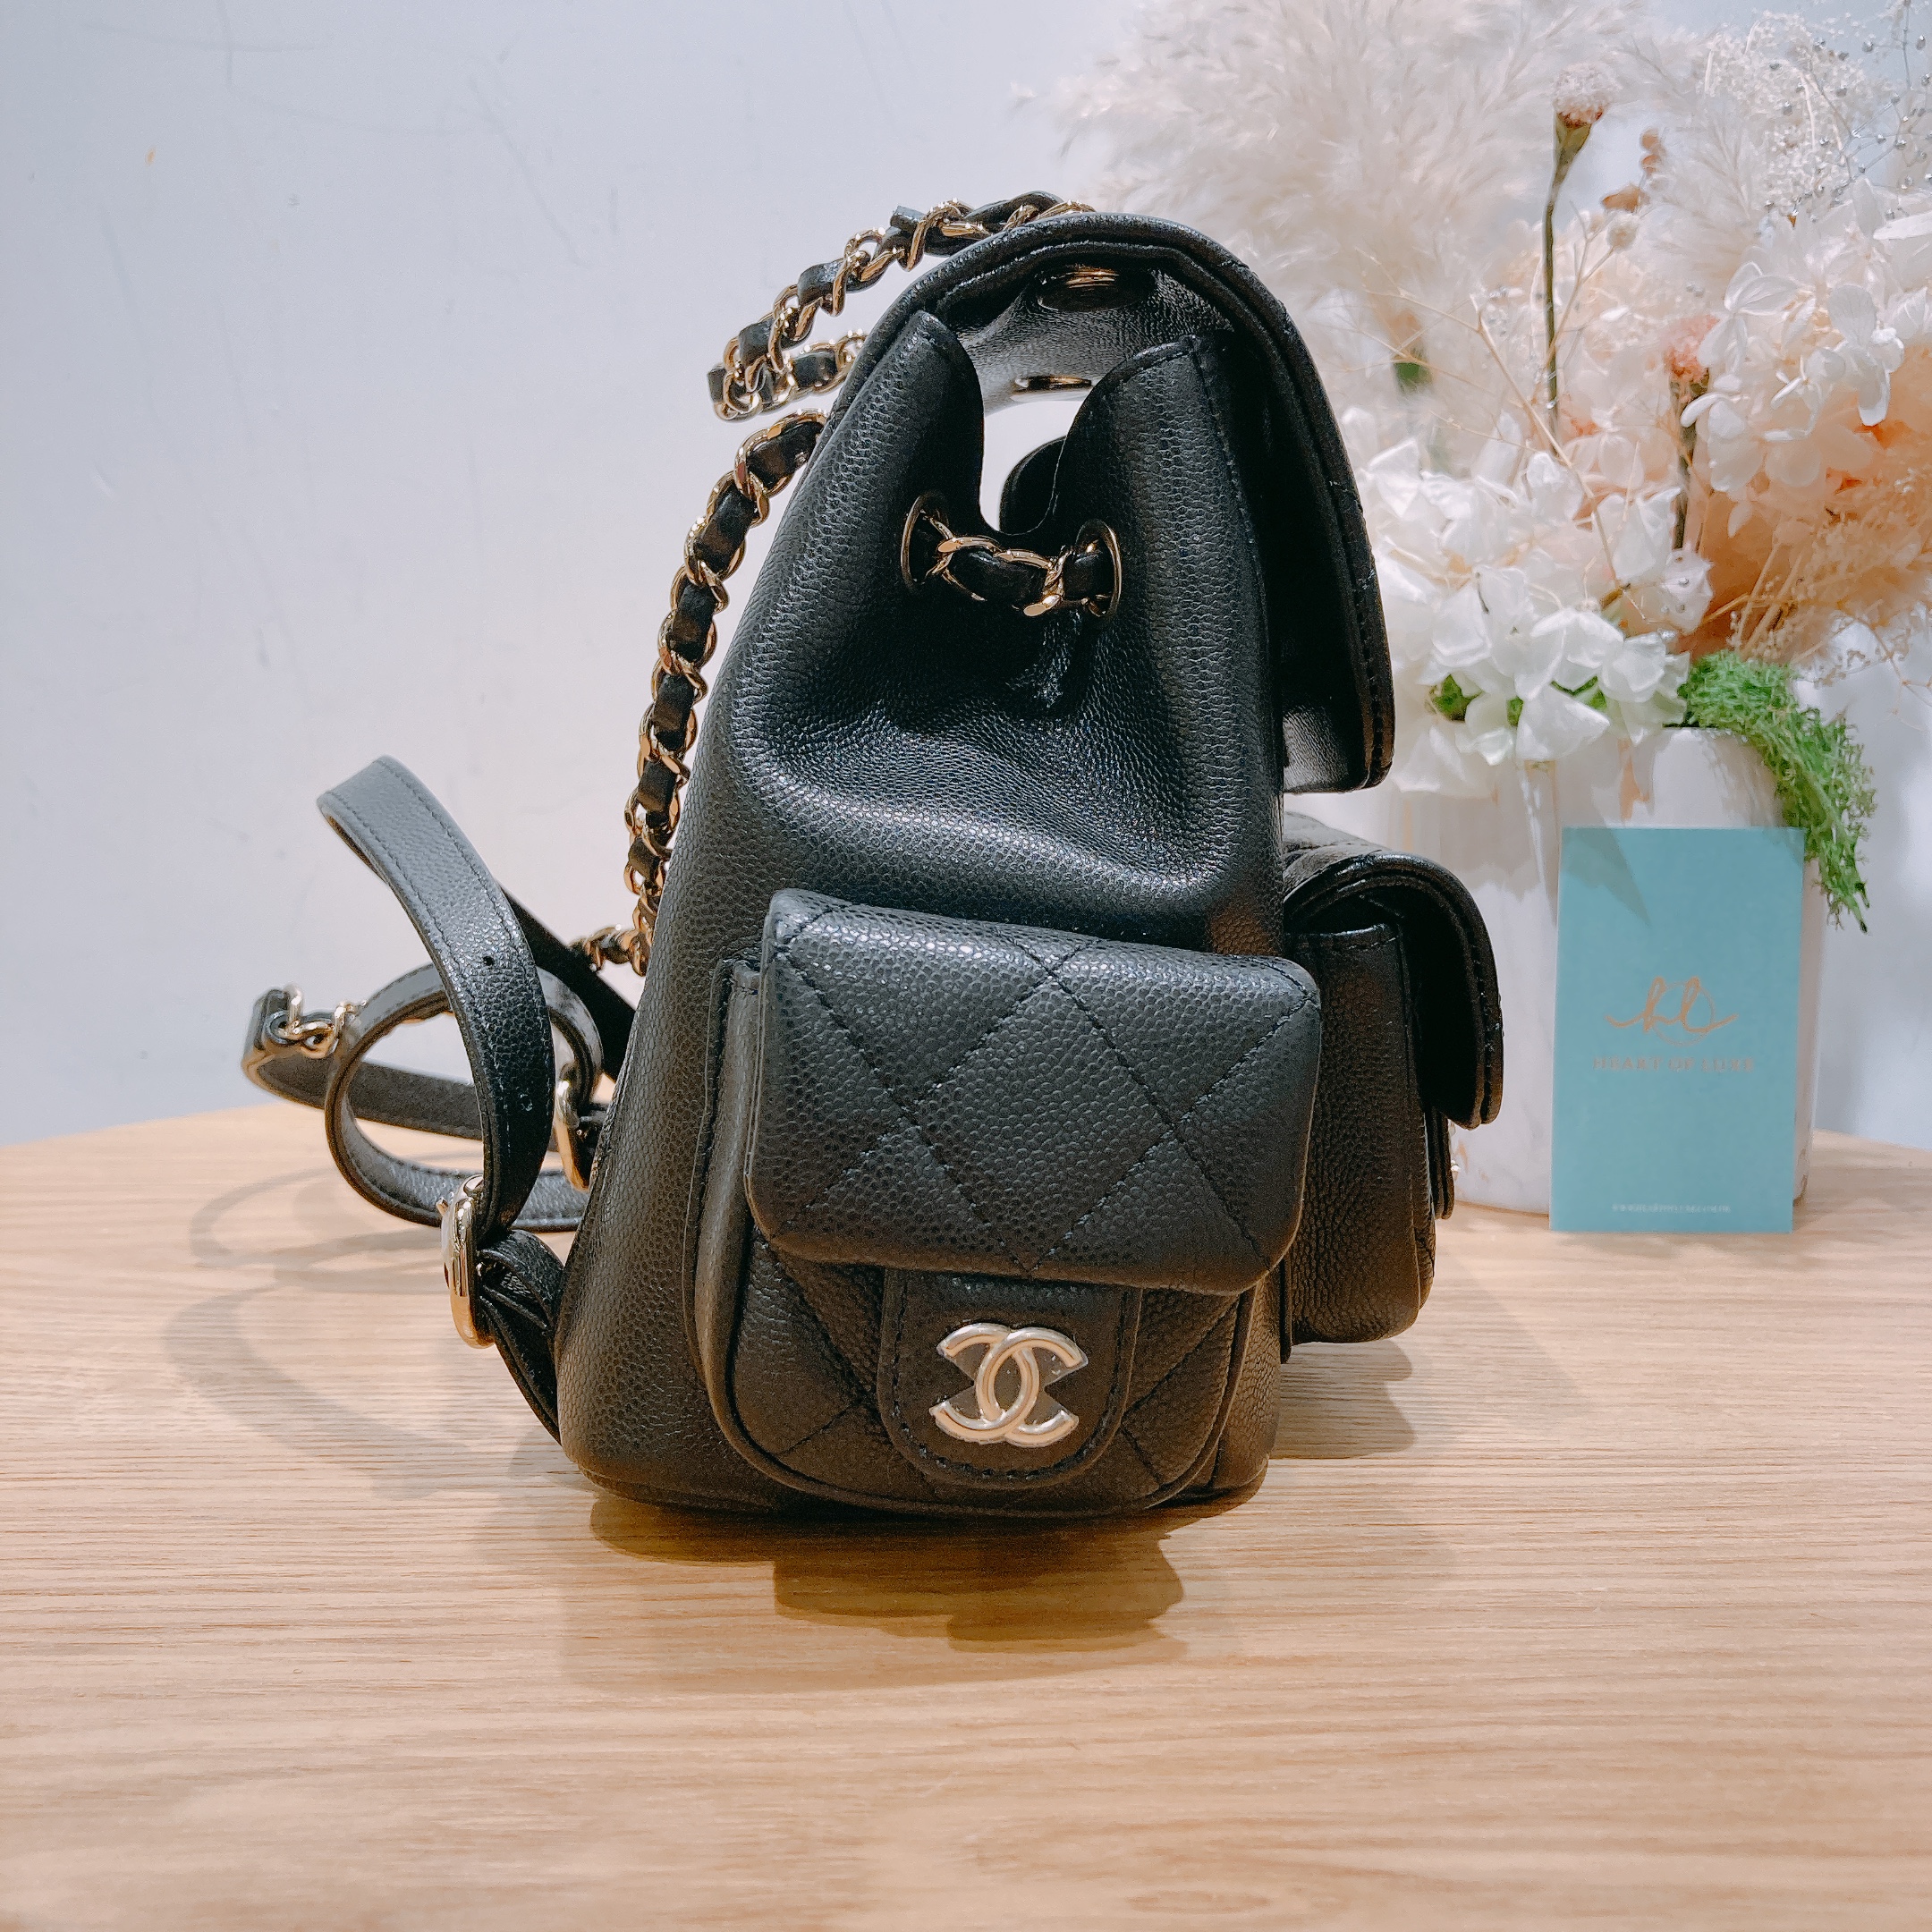 I Bought An Authentic Chanel Backpack on eBay... What Do I Think?! | The  Sweetest Thing | Chanel backpack, Women leather backpack, Purse outfit